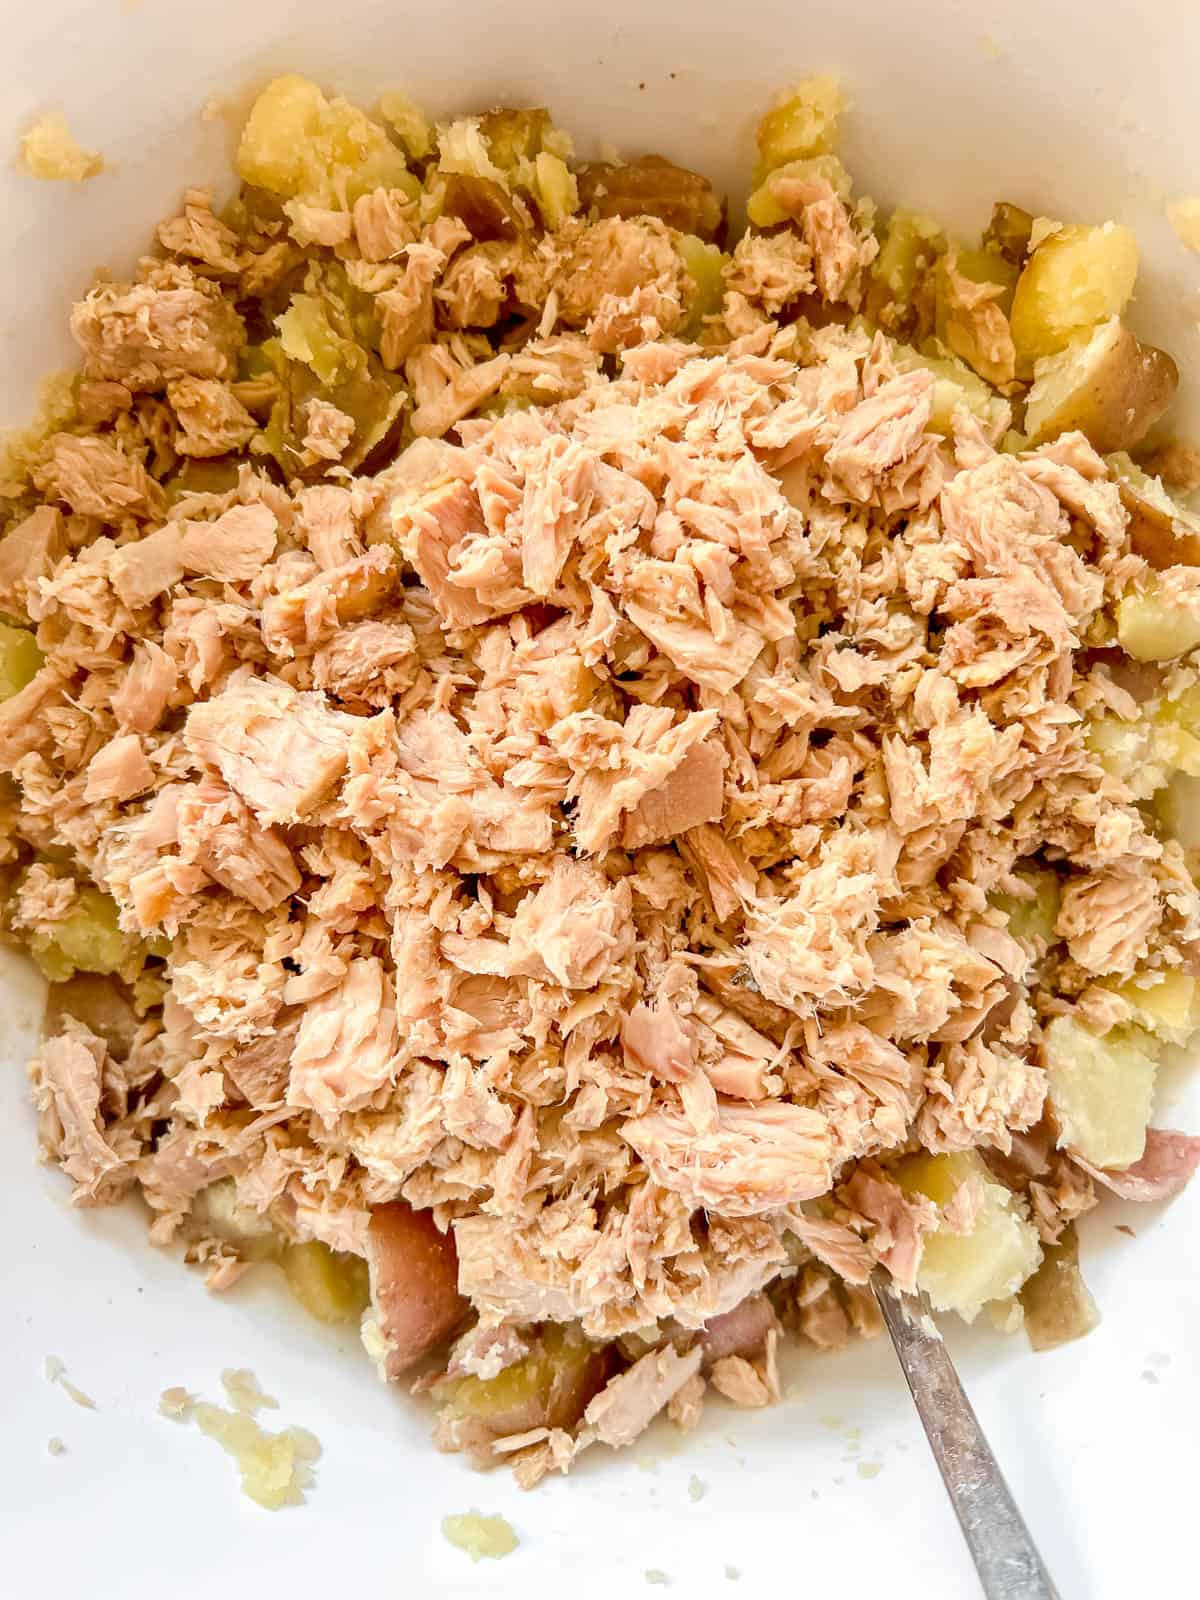 Tuna and potatoes in a large bowl.